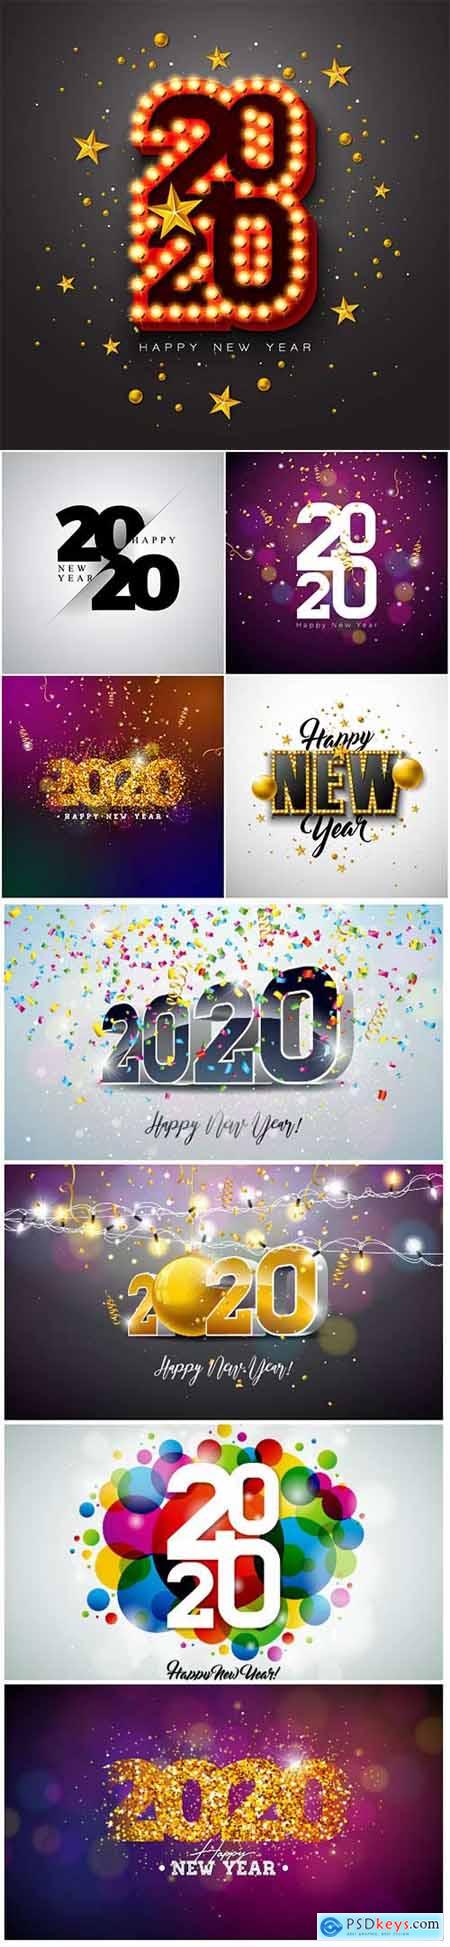 2020 Happy New Year illustration with 3d typography lettering, and